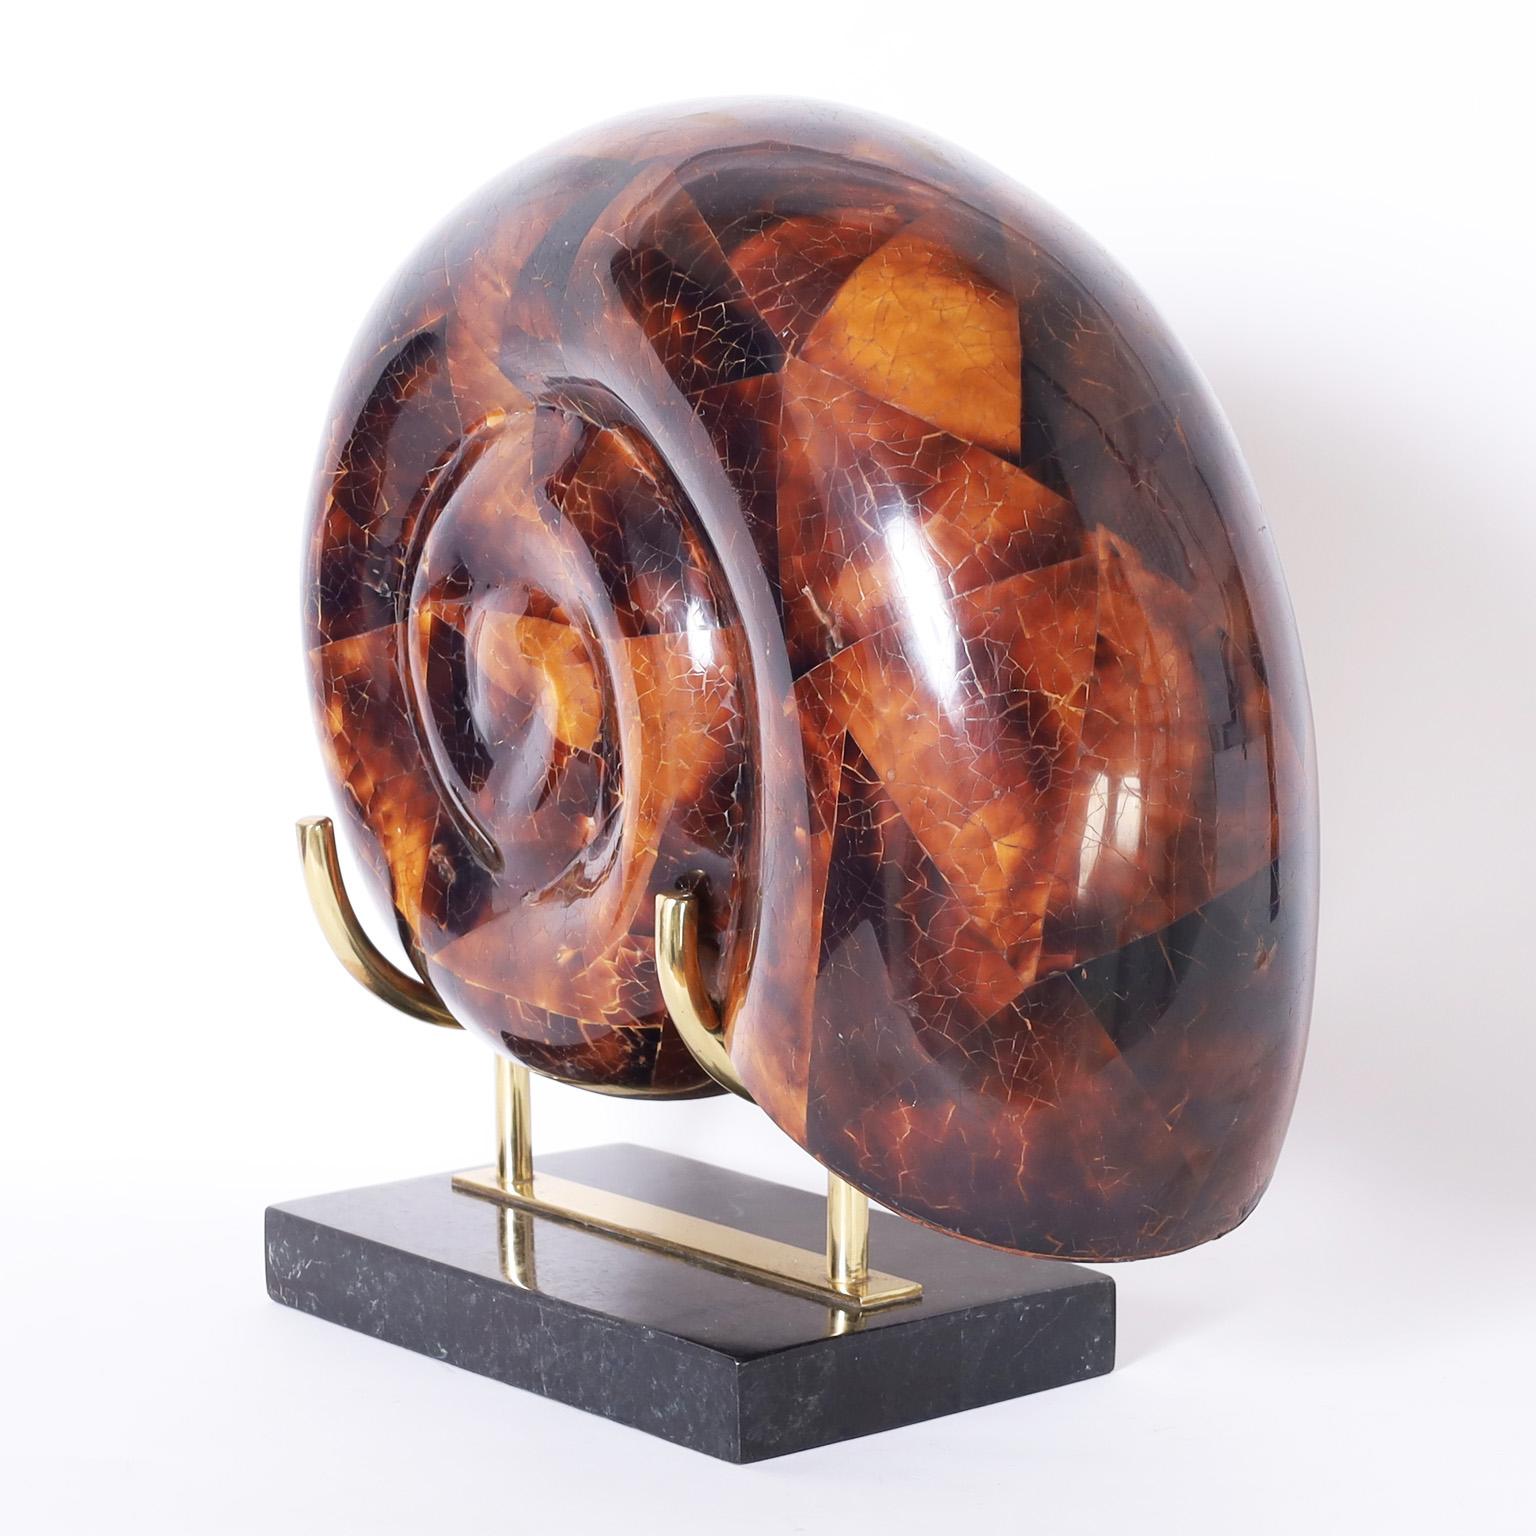 Eye catching vintage nautilus sculpture crafted in penshell and presented on a brass and stone stand by Maitland-Smith.